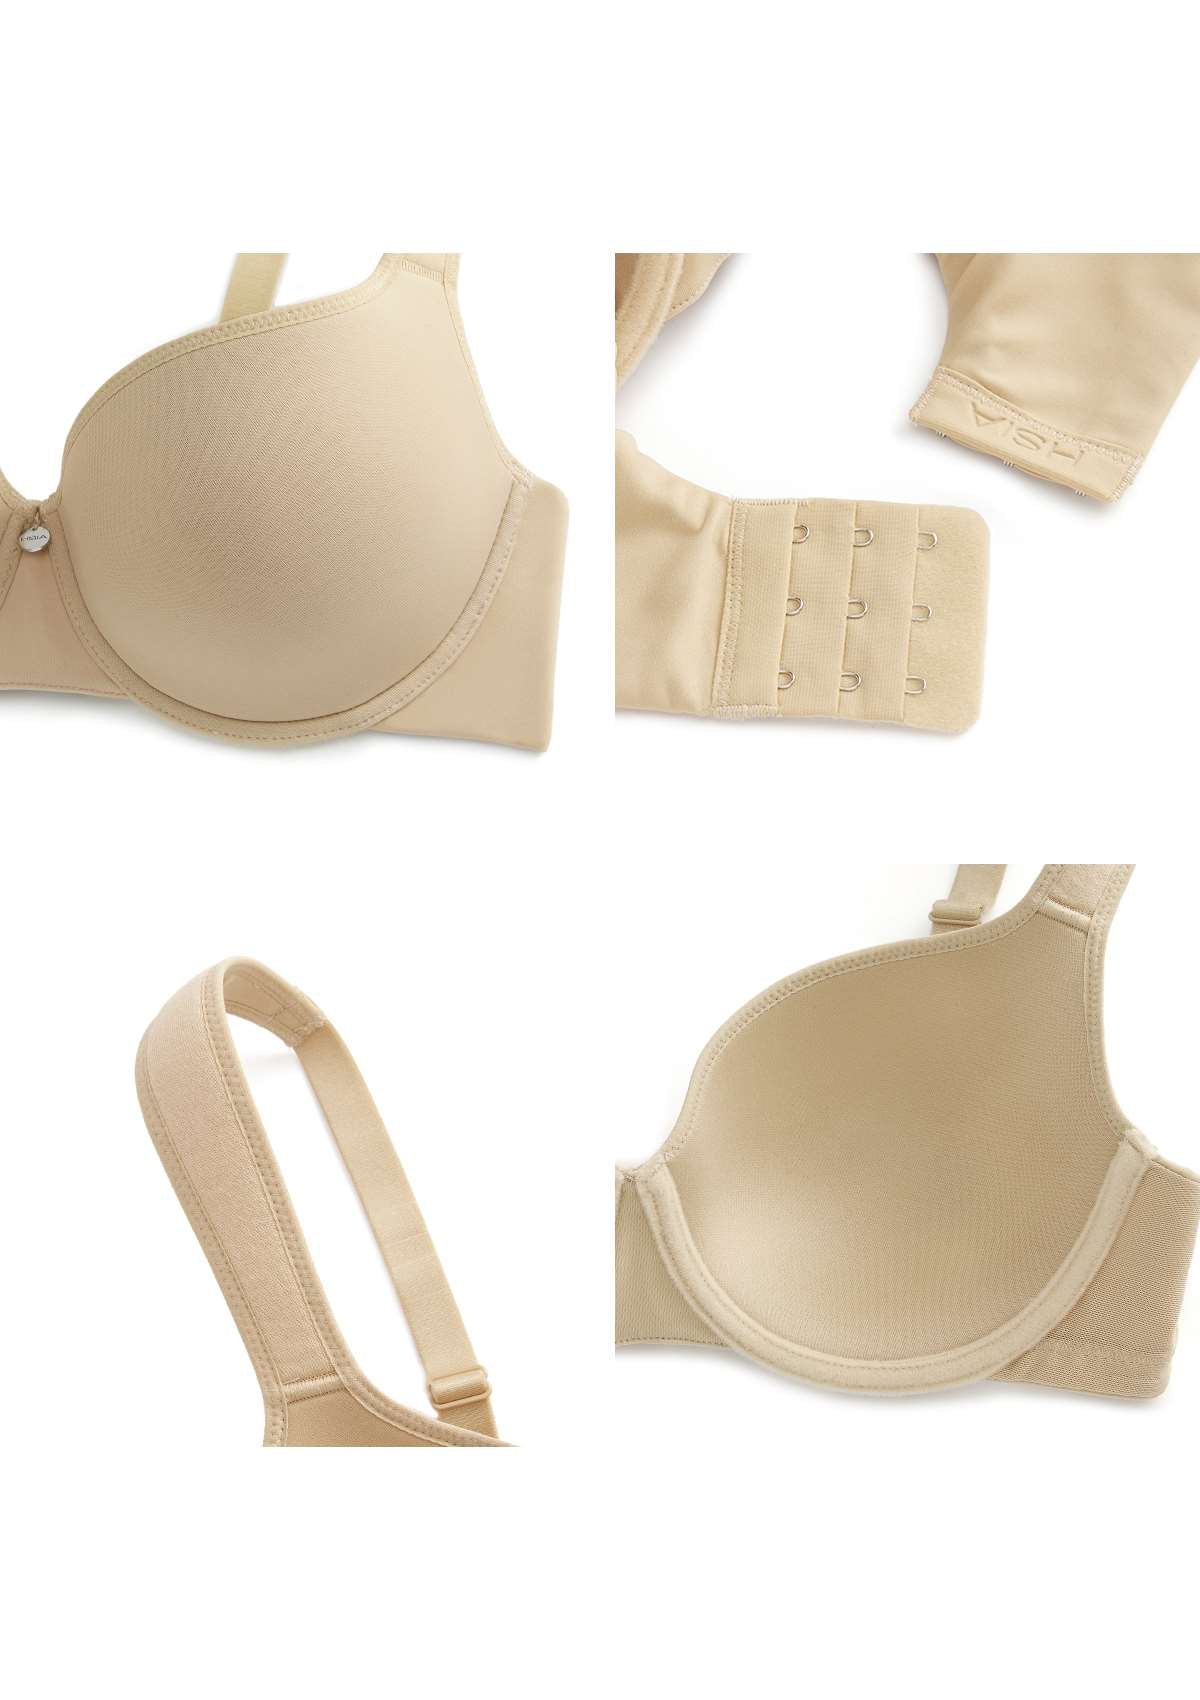 HSIA Patricia Seamless Lightly Padded Minimizer Bra -for Bigger Busts - Beige / 42 / DD/E